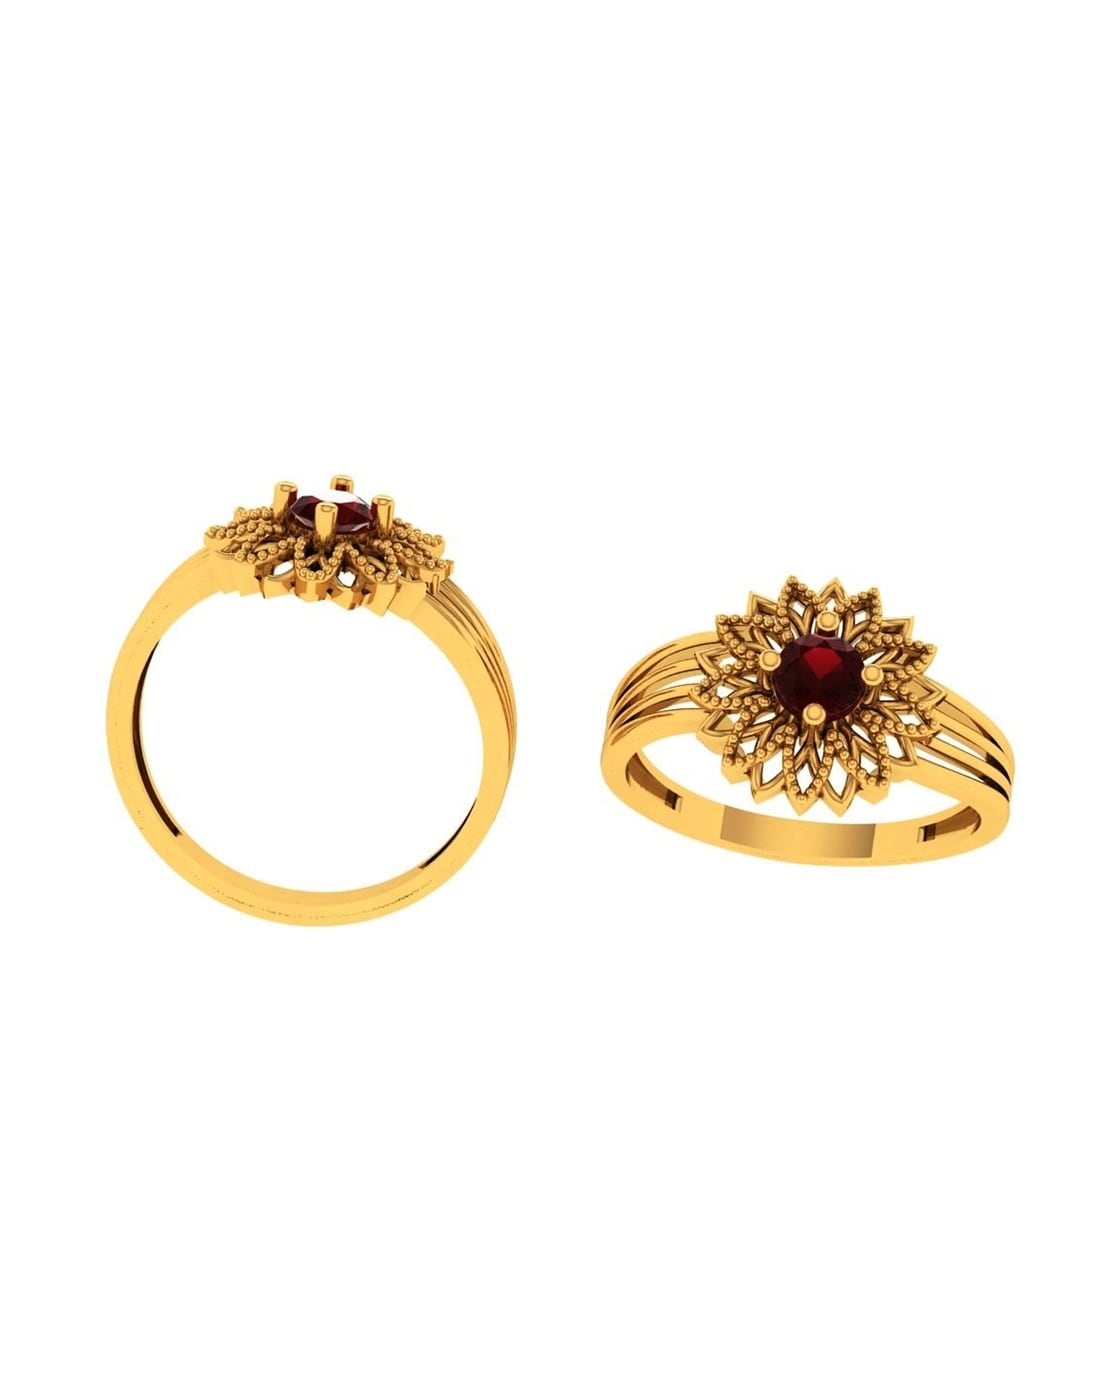 Gold Wedding Rings for Women | PC Chandra Jewellers